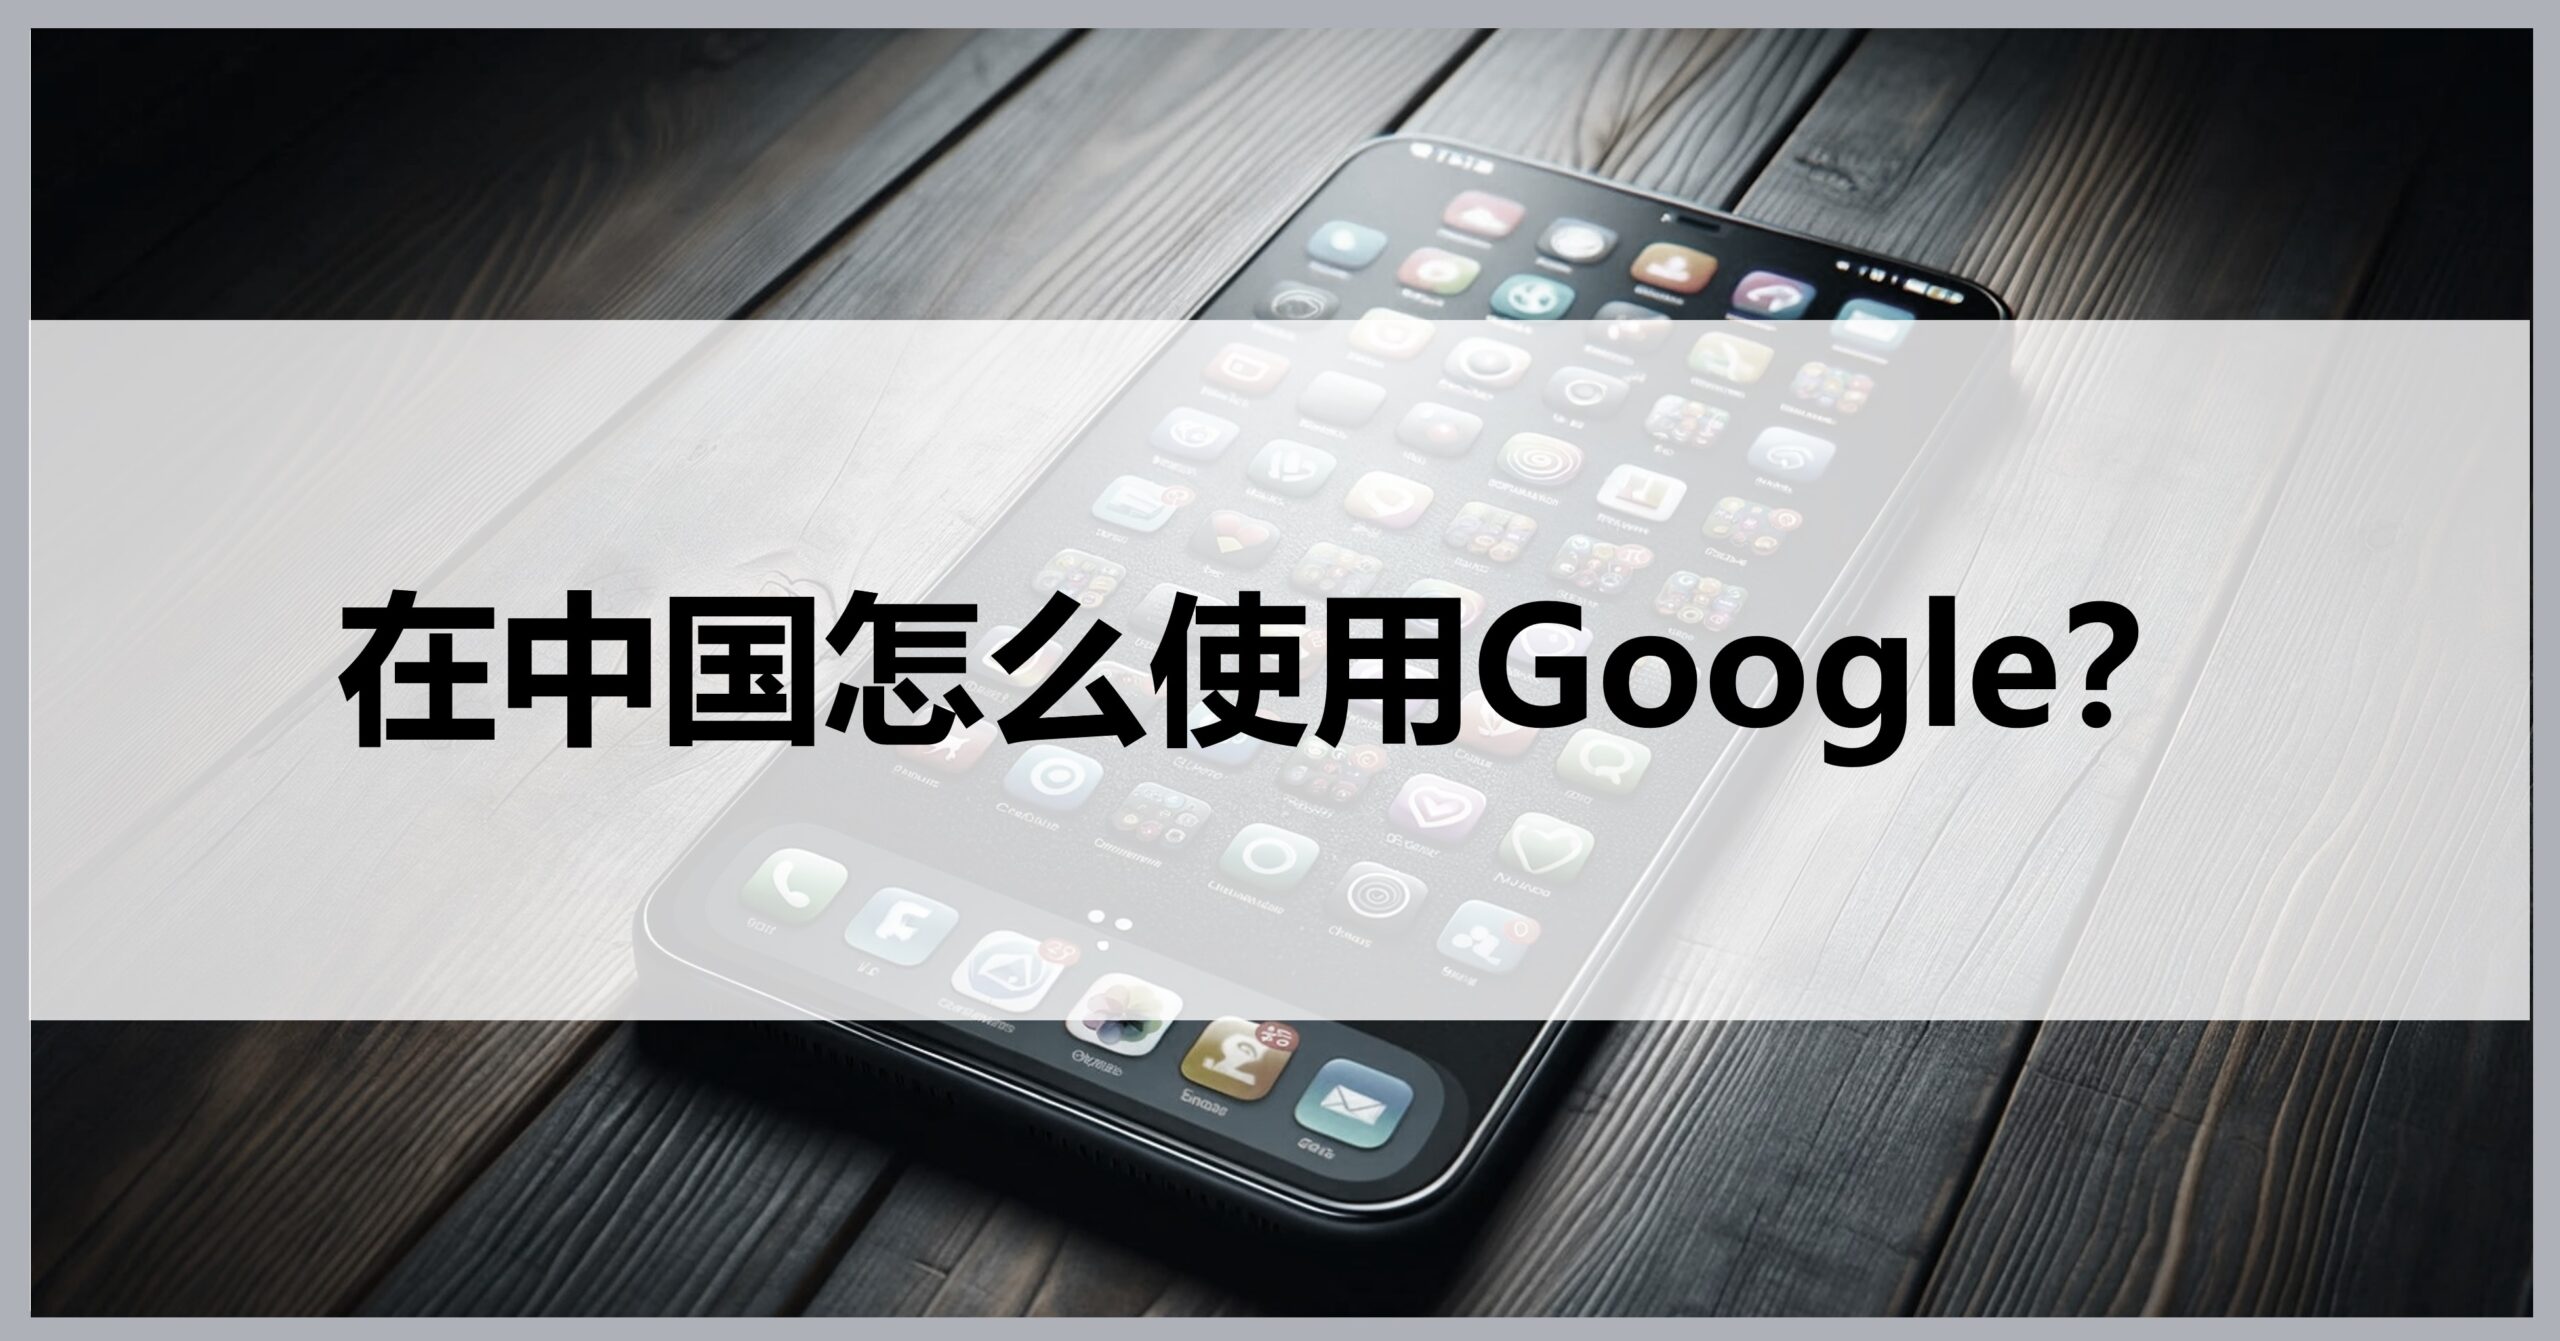 How to access Google in China?